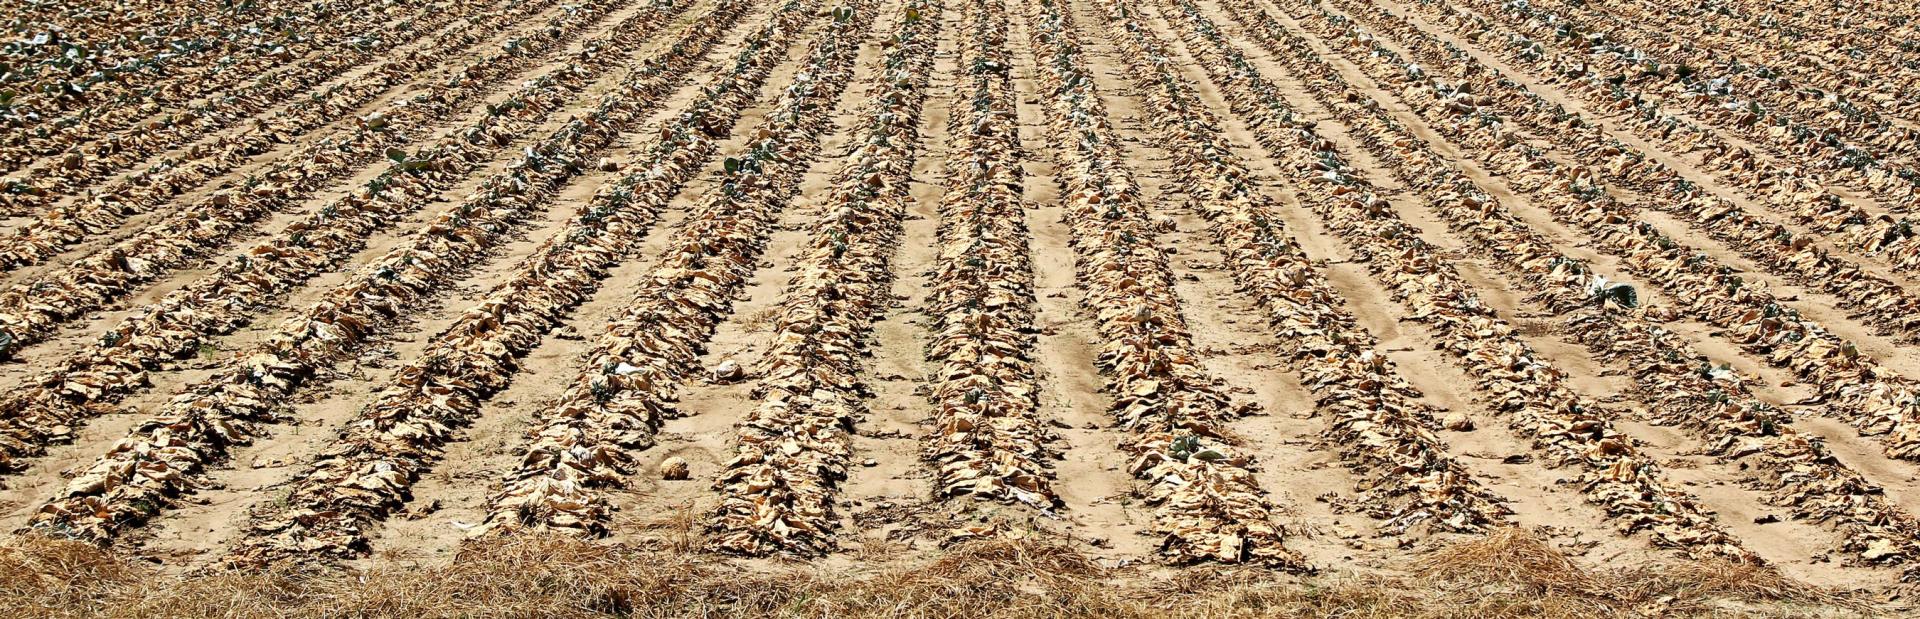 A field of drought-damaged crops